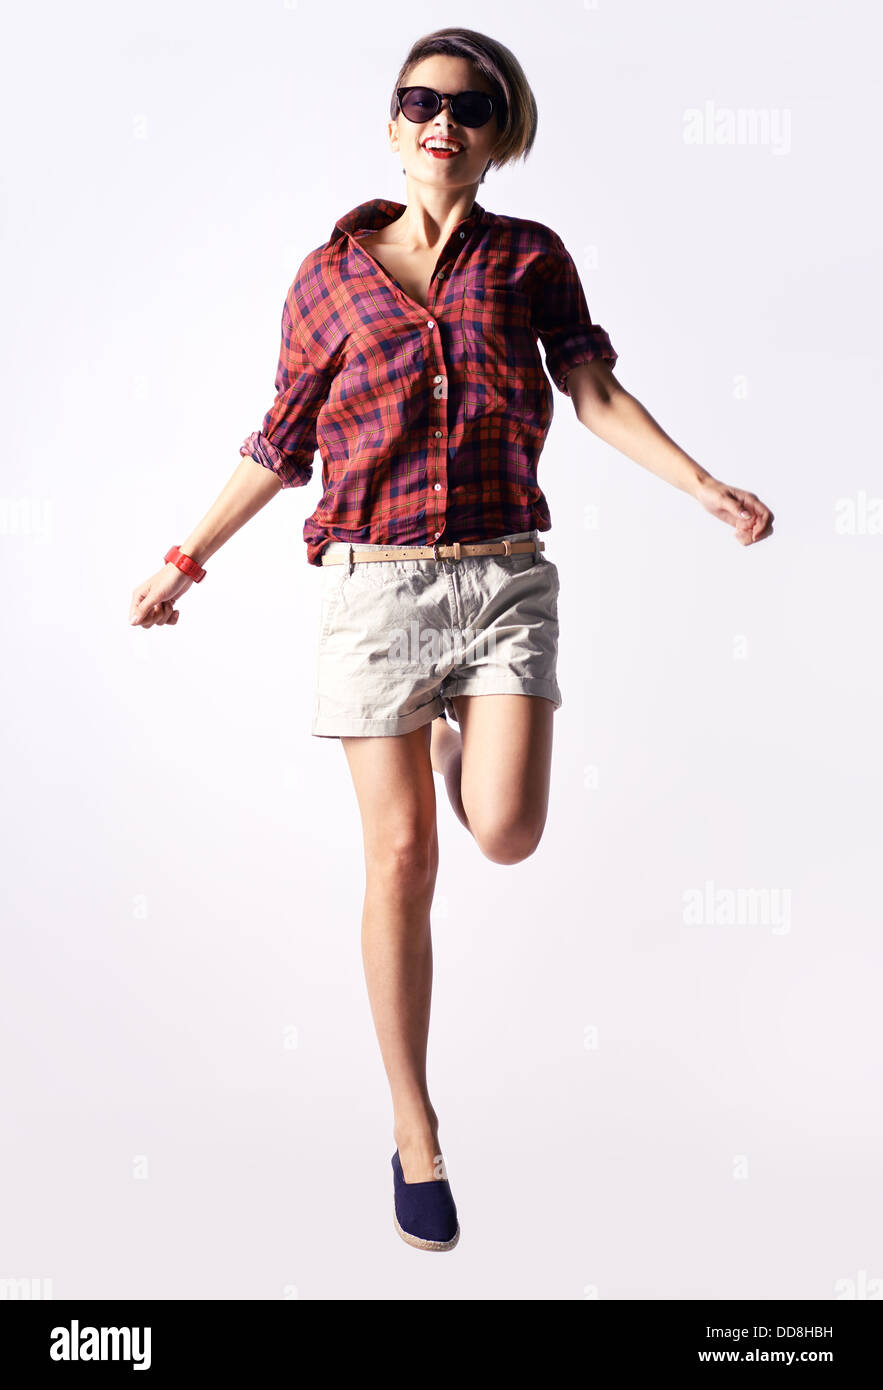 Vertical portrait of a carefree girl captured in a jump Stock Photo